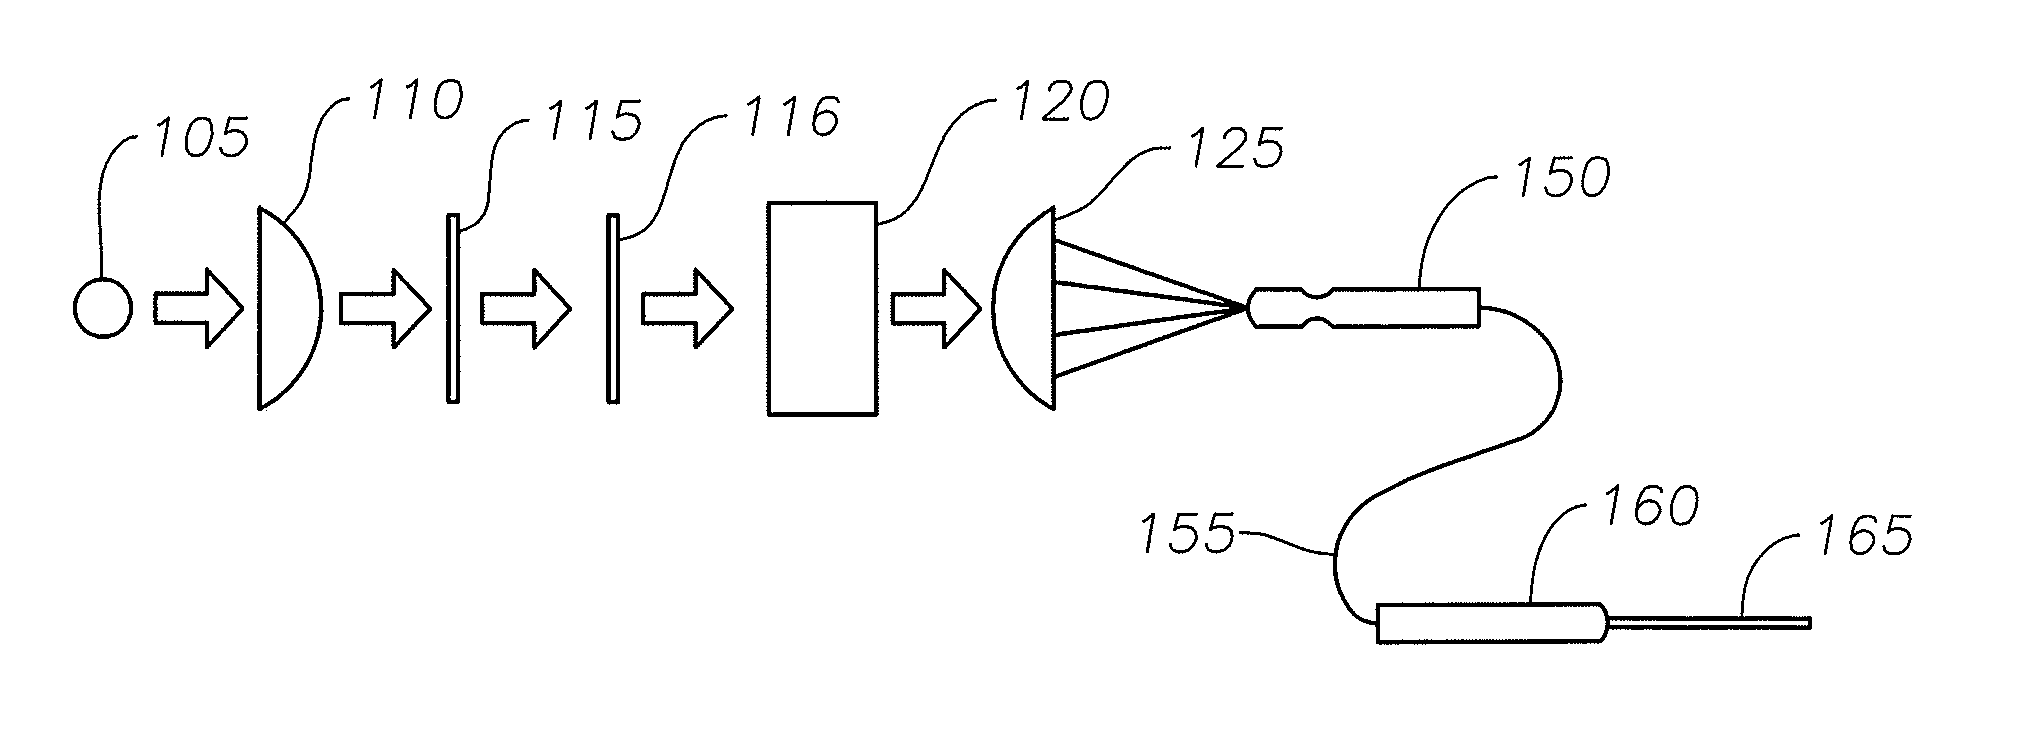 Dual-mode illumination for surgical instrument